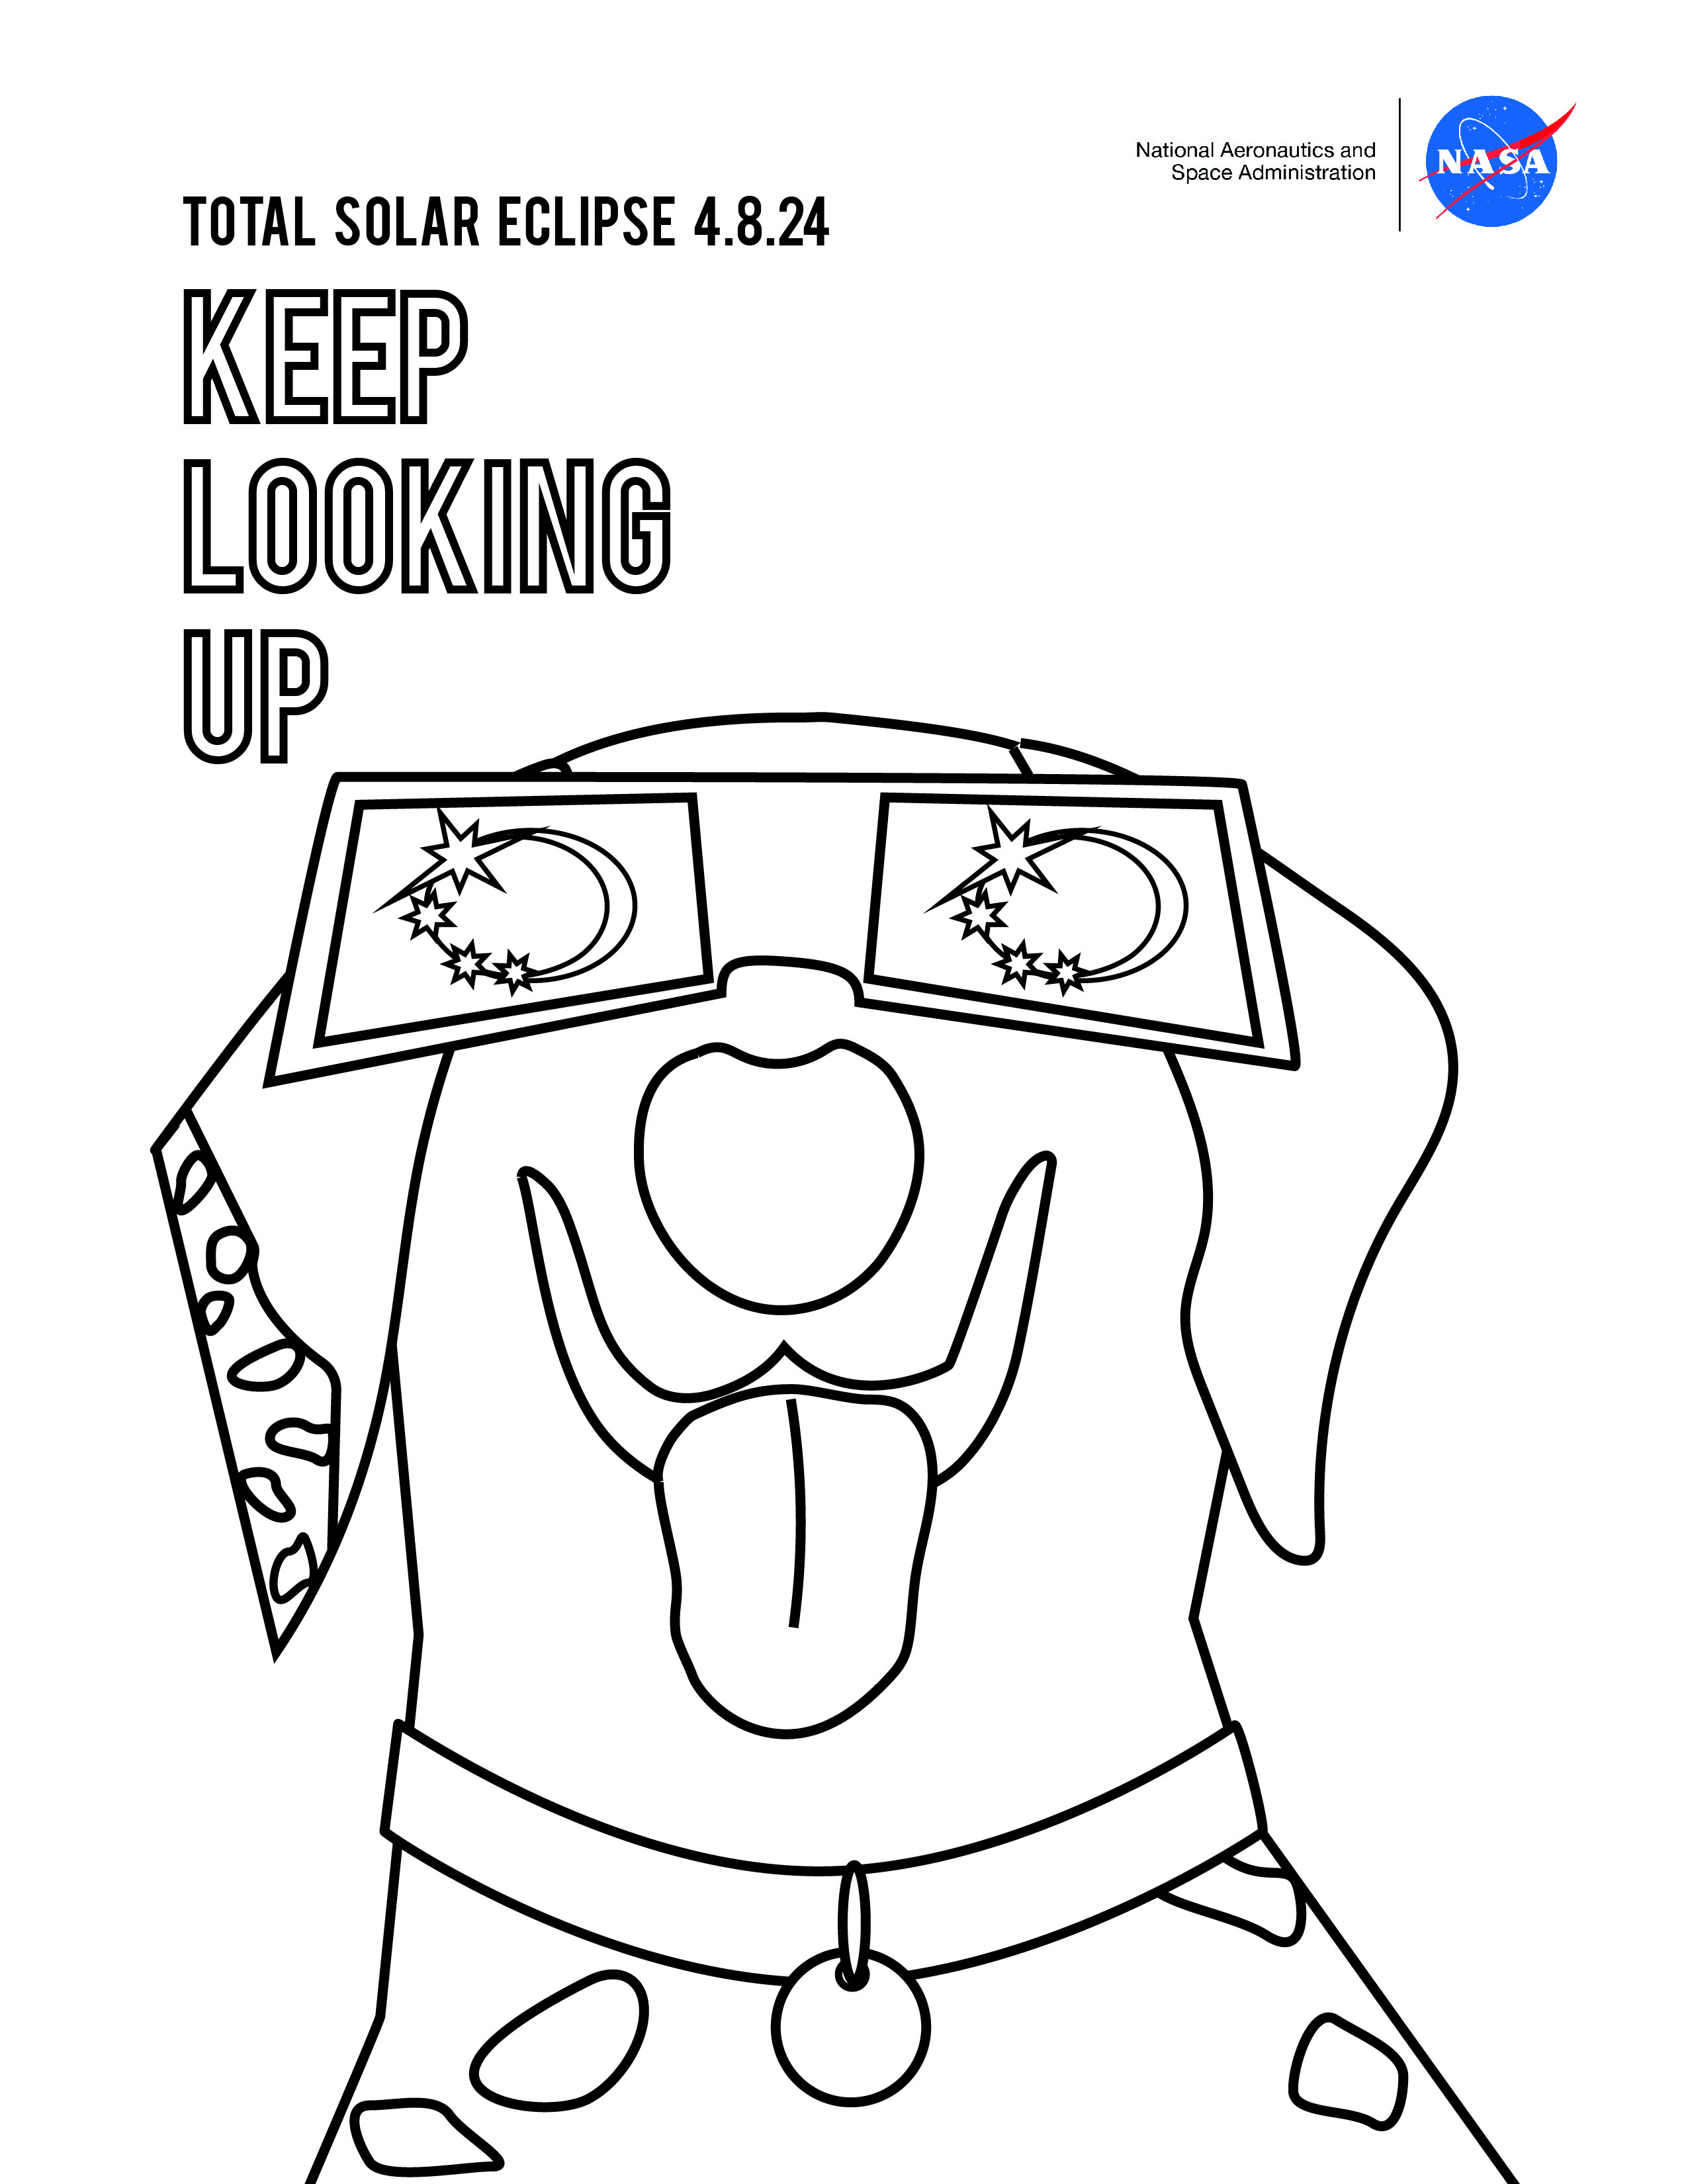 A black outline of a cartoon dog, with a few spots. The dog is looking up and wearing eclipse glasses. The eclipse is reflected in the lenses of the glasses. Toward the top left are the words "Through the eyes of NASA, Total Solar Eclipse 4.8.24, Keep Looking Up." There is a NASA insignia at the top right corner.